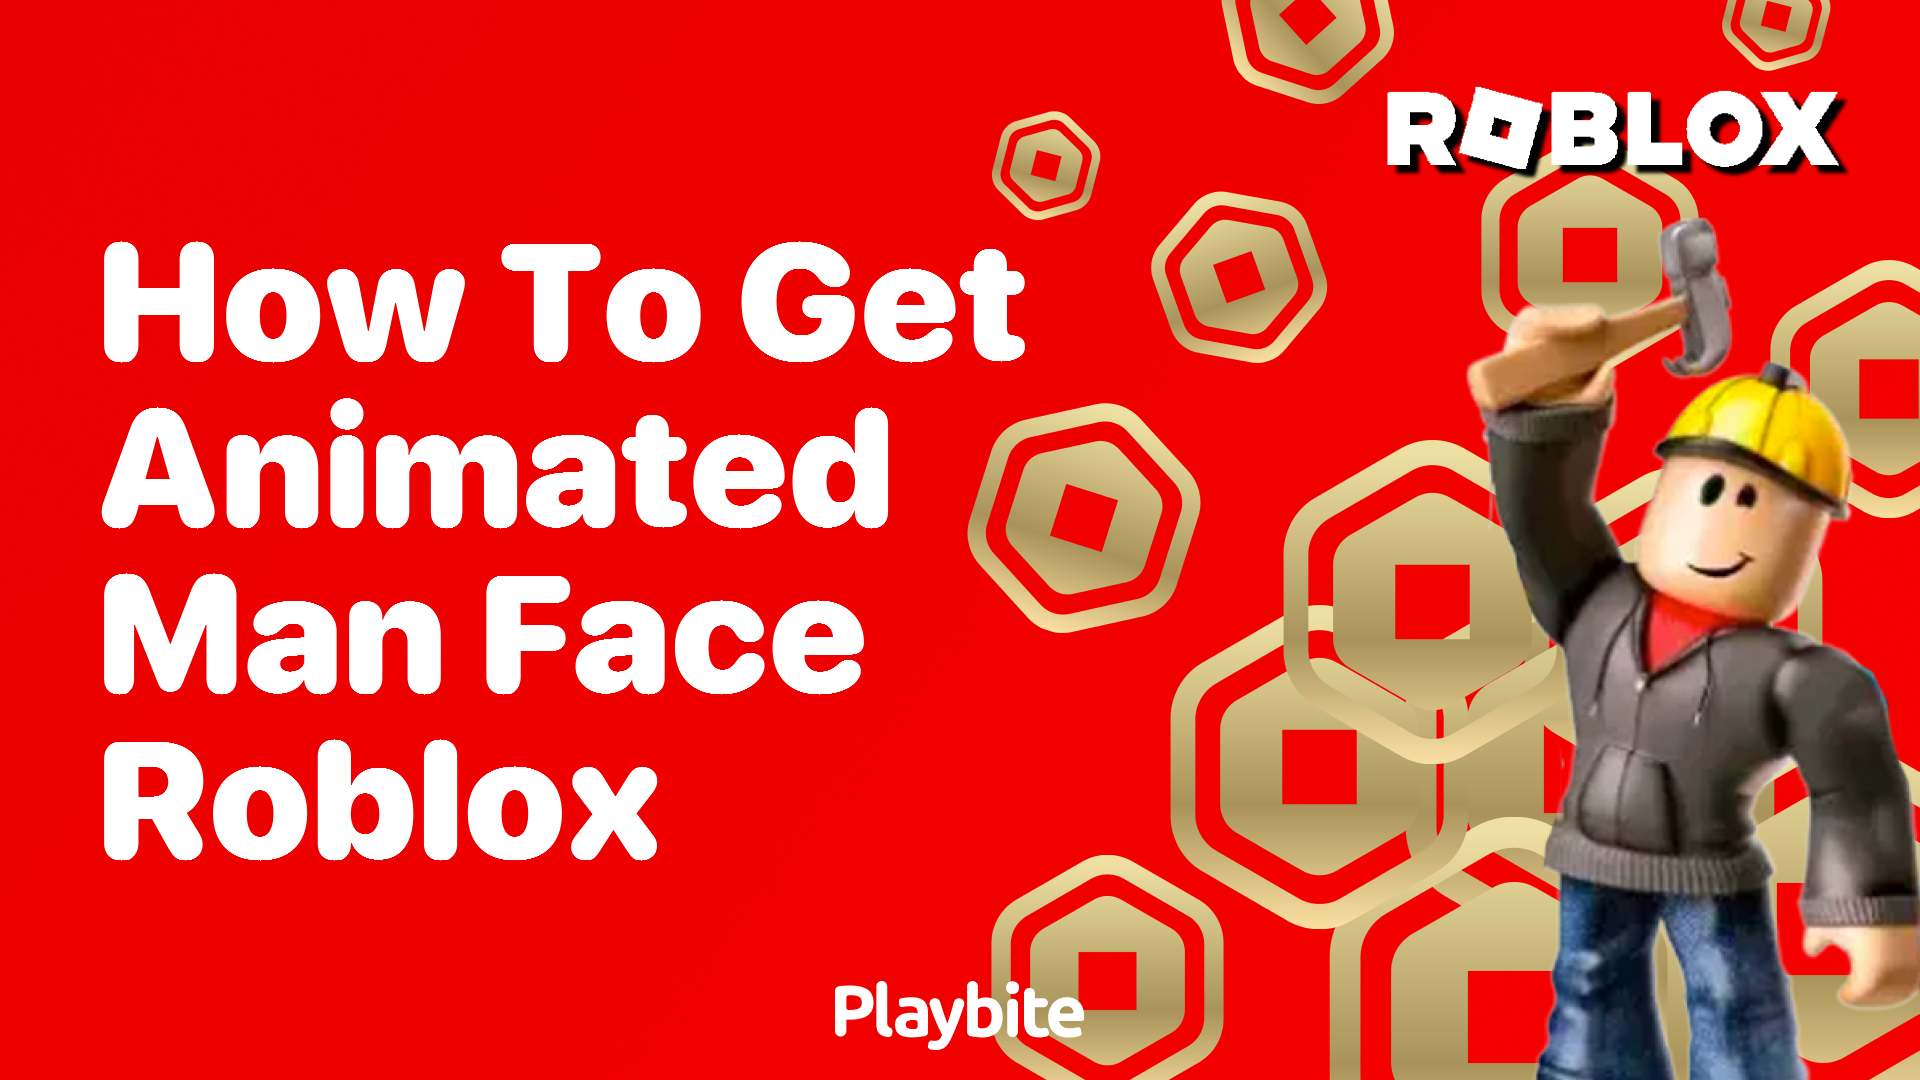 How to Get the Animated Man Face on Roblox